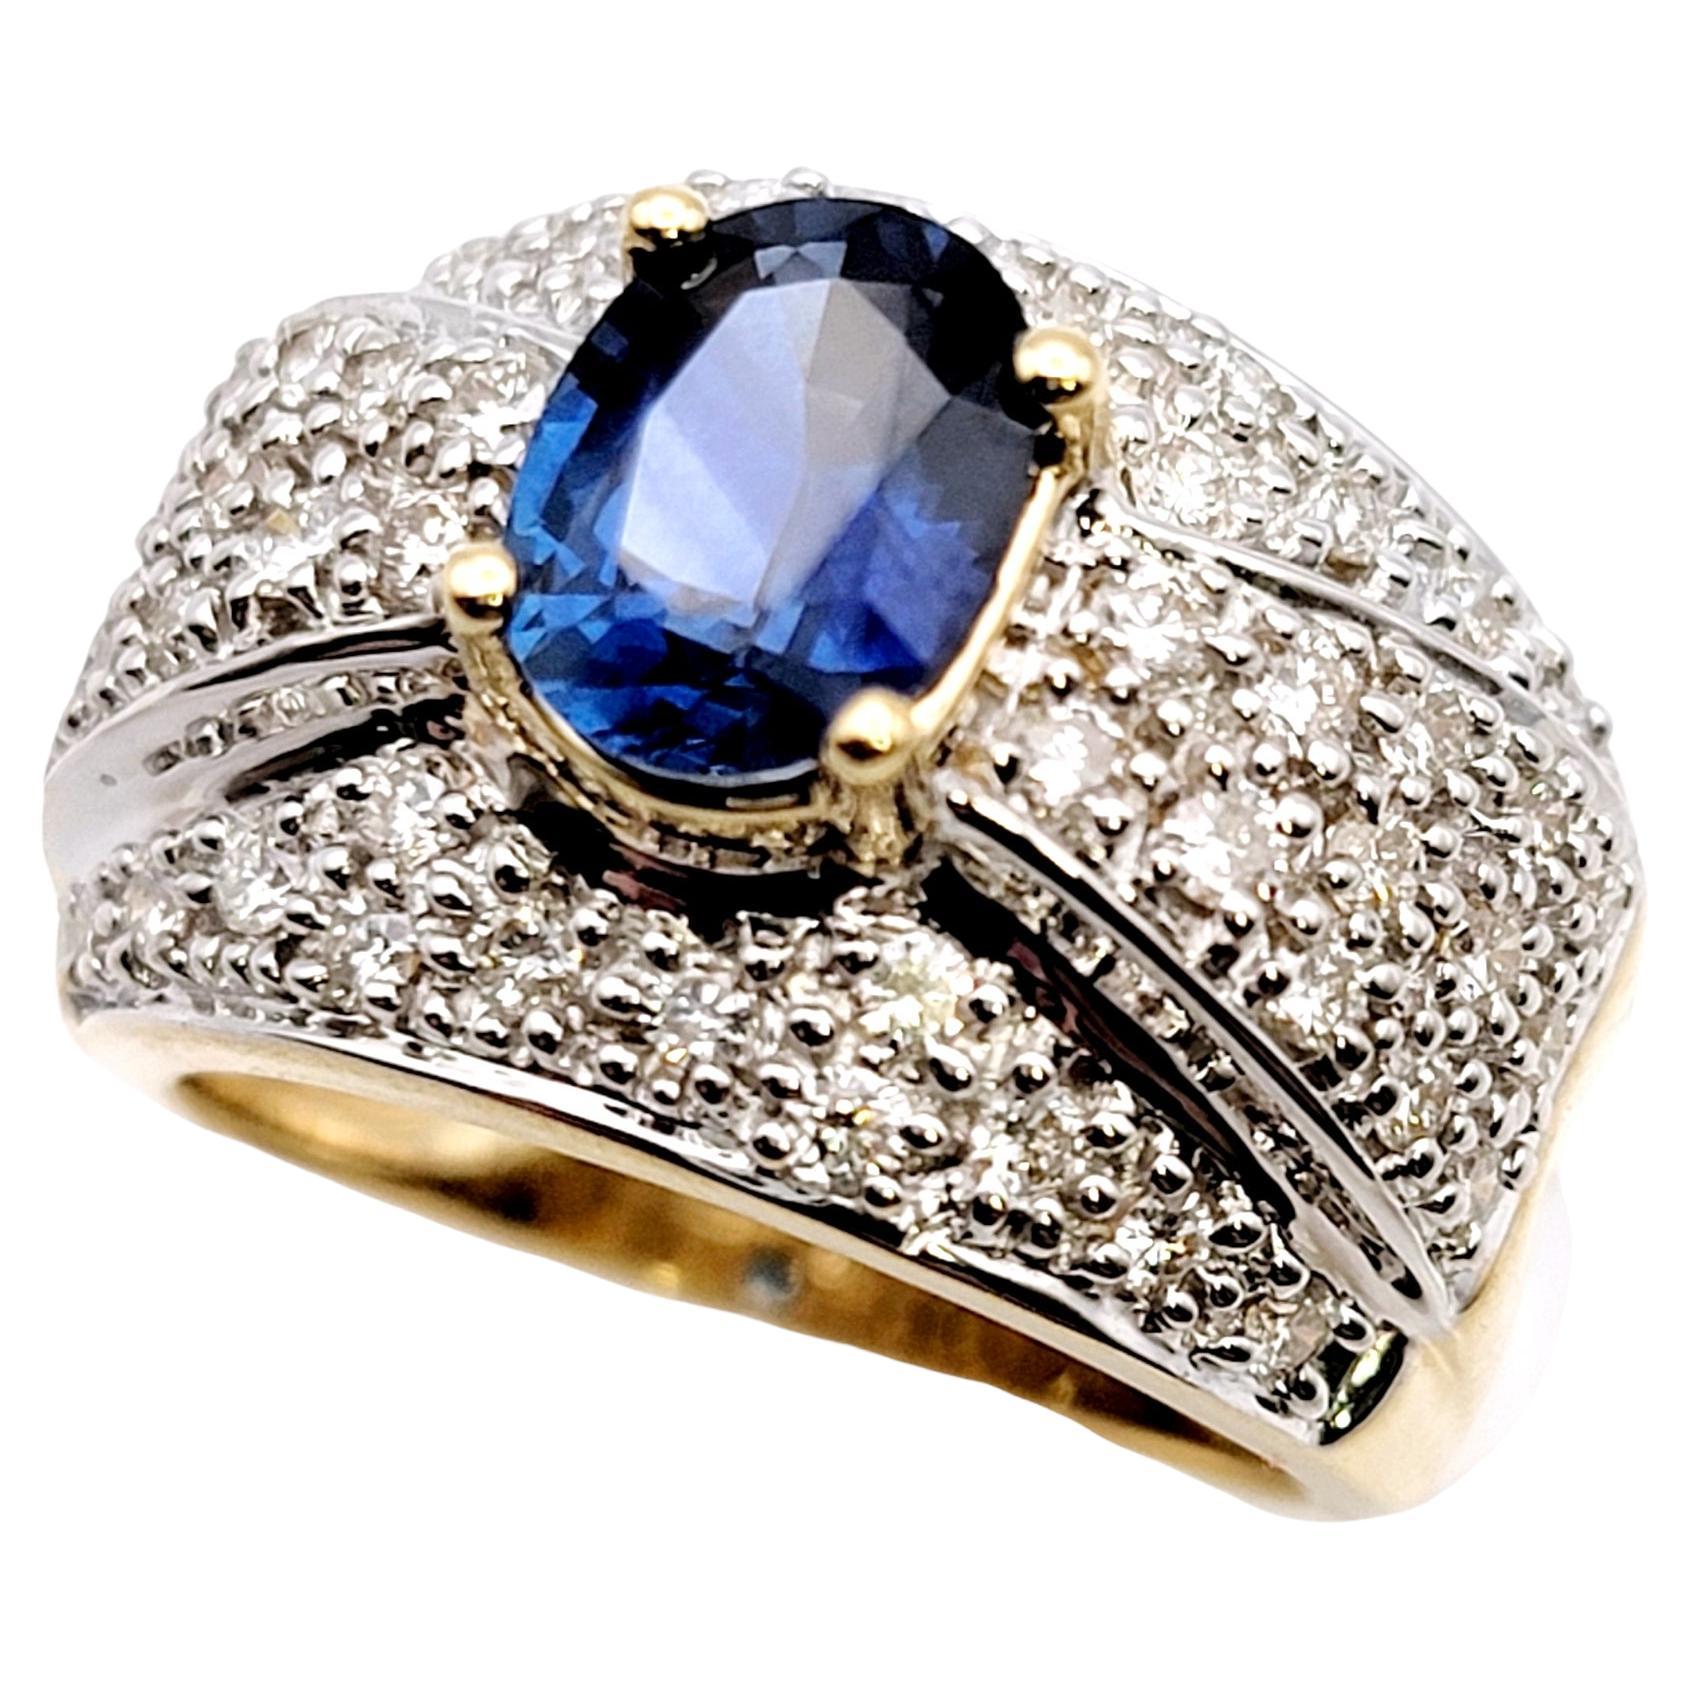 Ring size: 5

Stunningly sparkly wide diamond band ring with a single breathtaking sapphire stone at the center. The striking blue color of the incredible sapphire is enhanced by glittering natural white diamonds that surround it, while the two tone